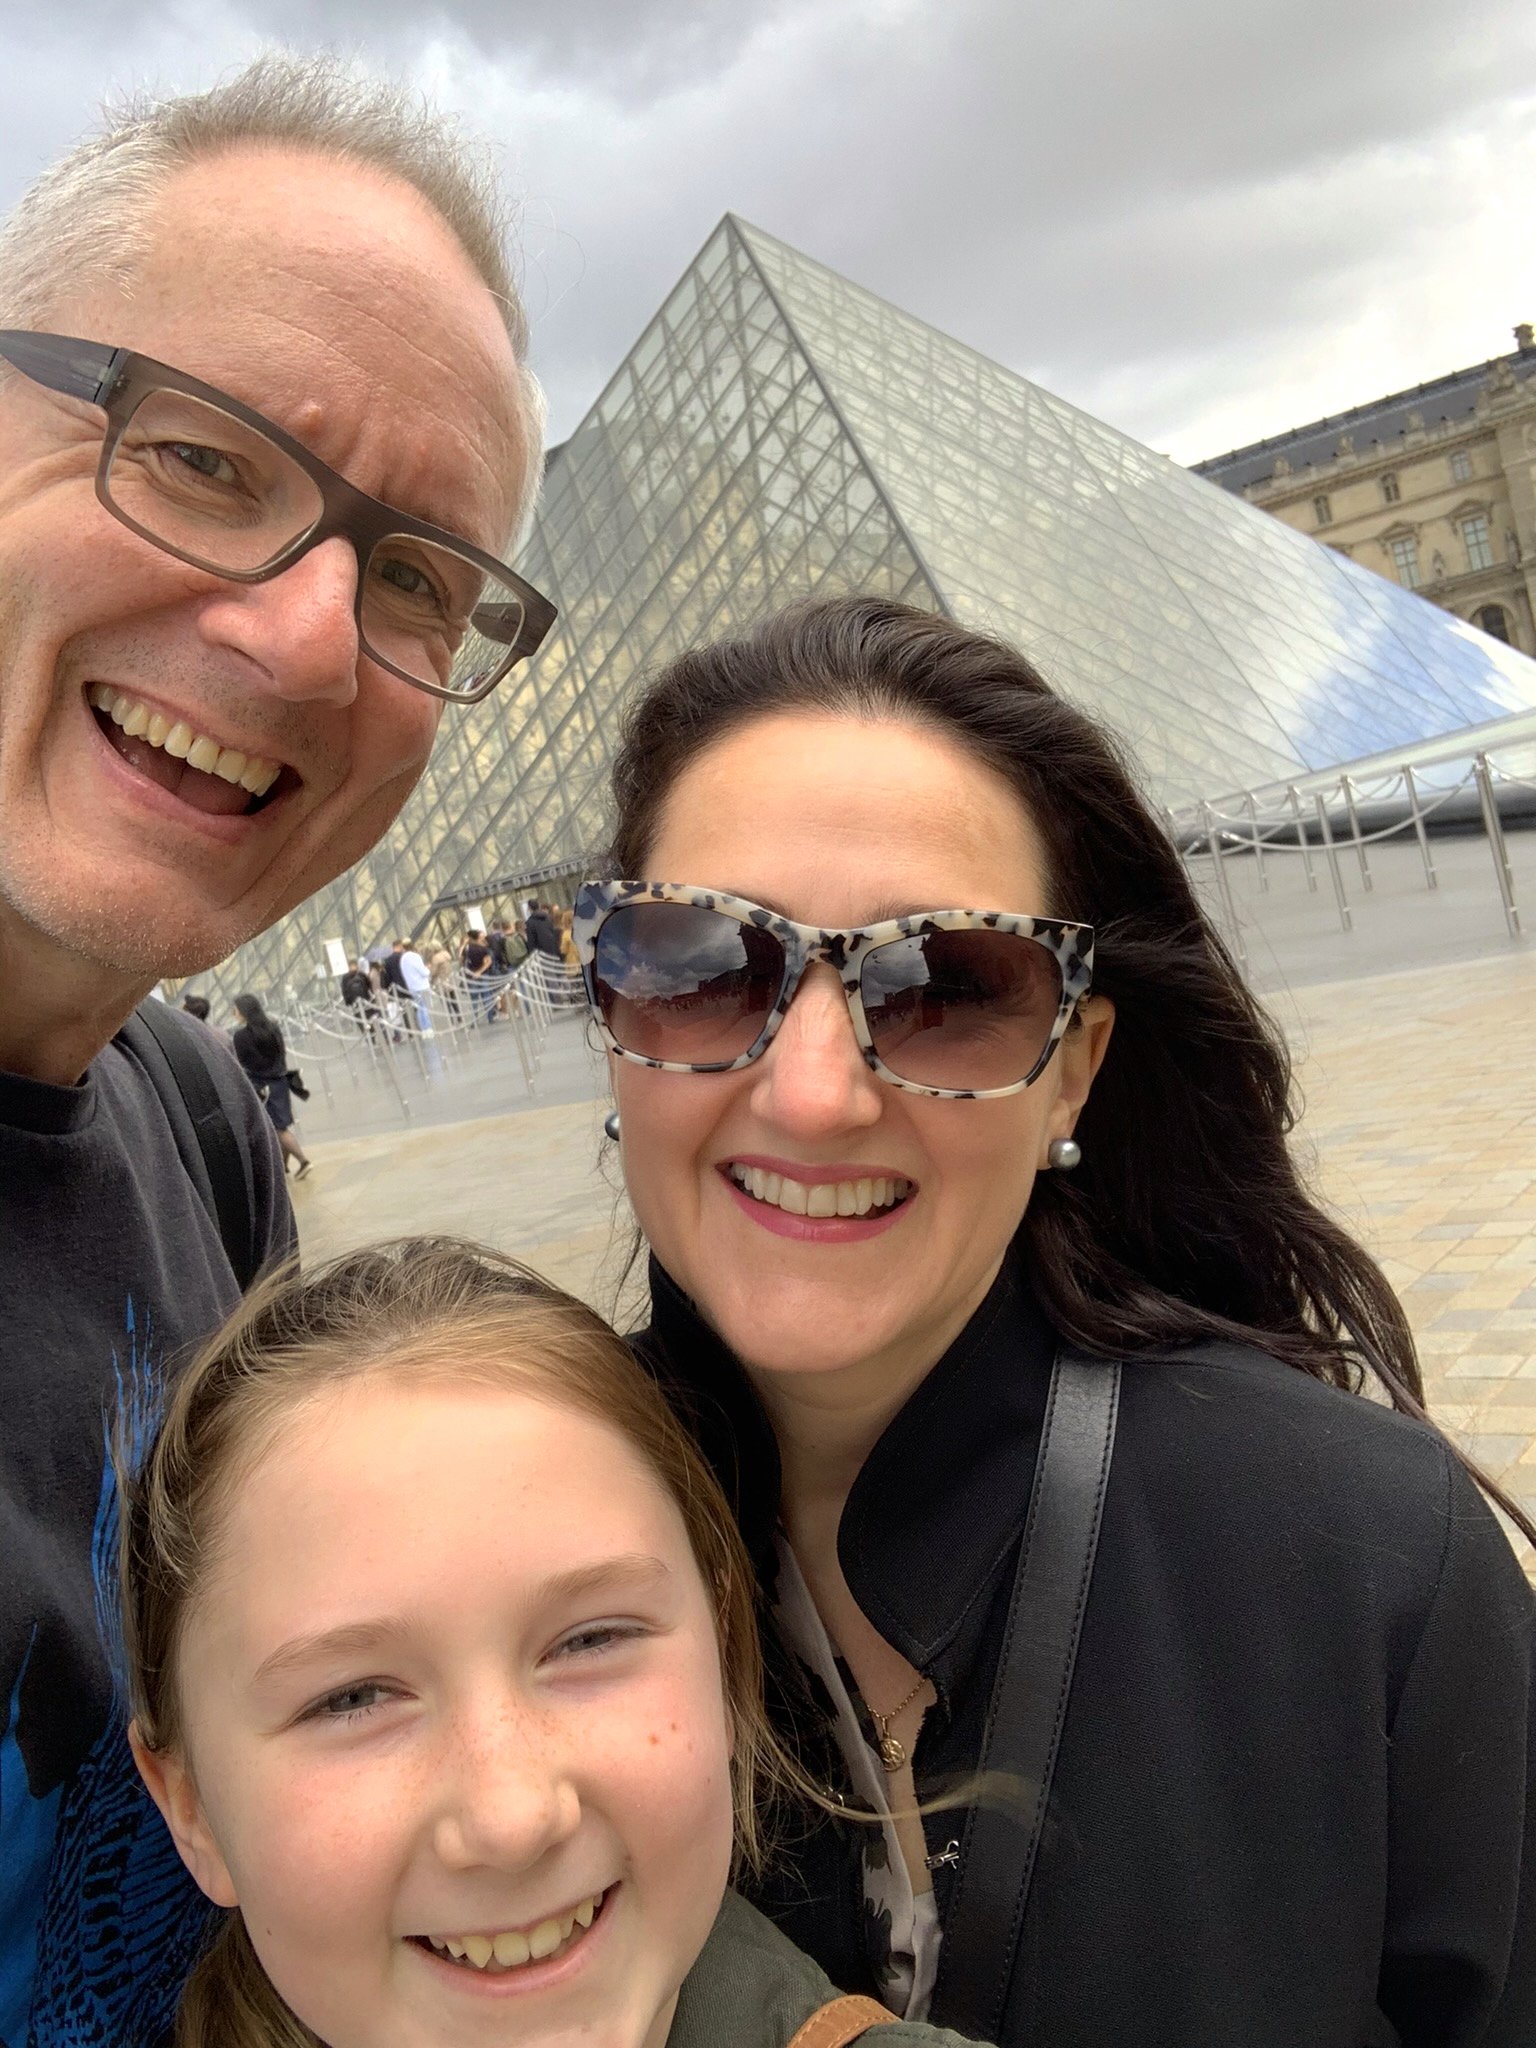 Family outside the Louvre by I.M Pei pyramid.jpg